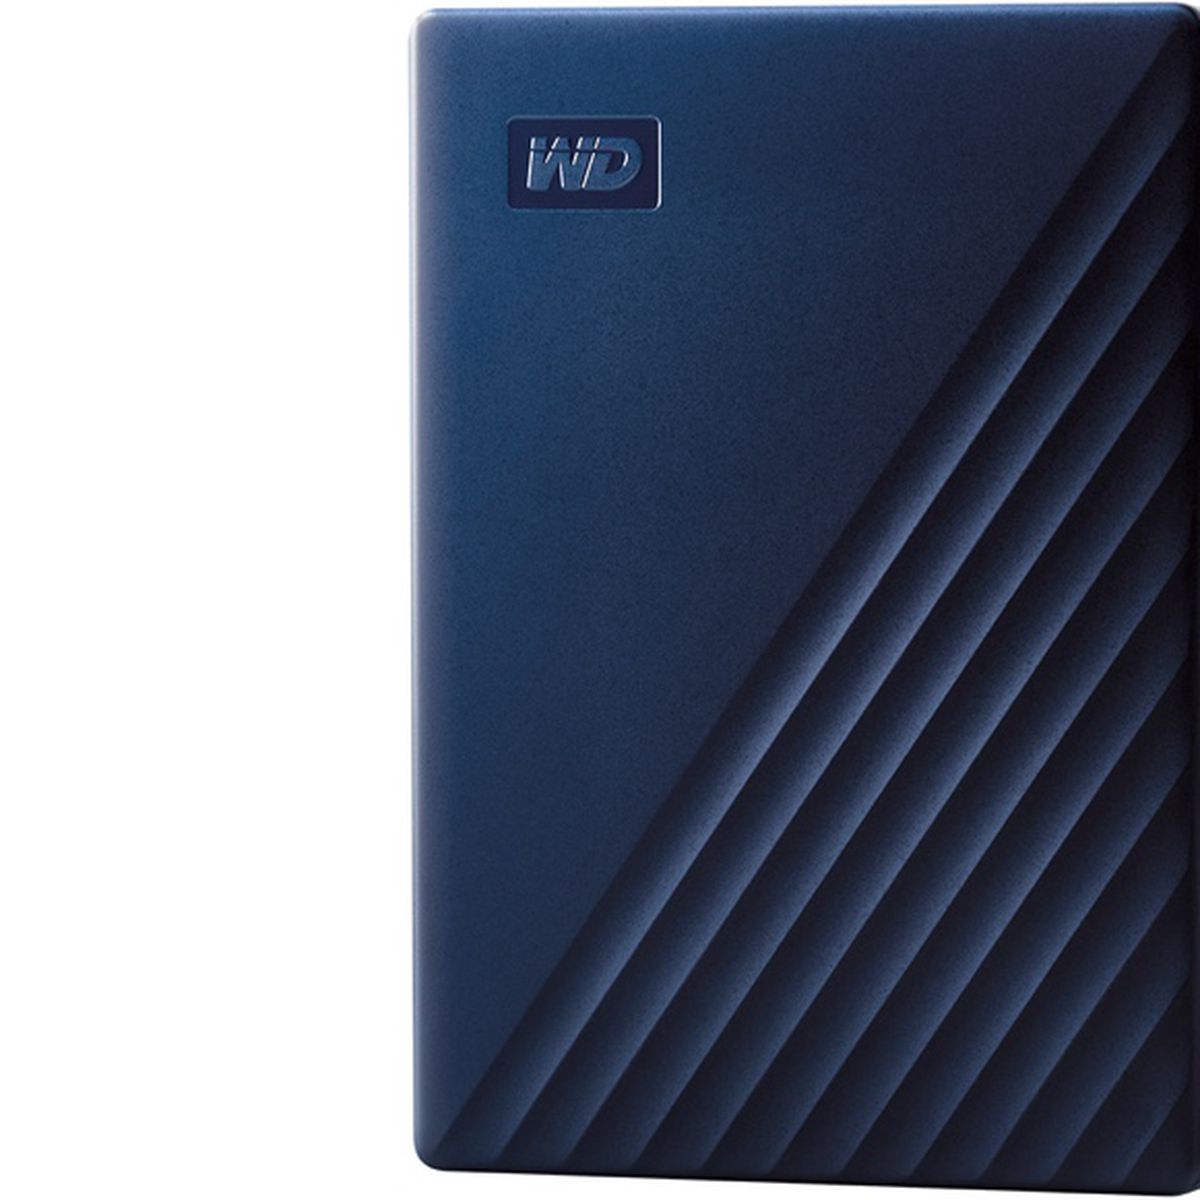 wd hard drive reformat for mac use pc